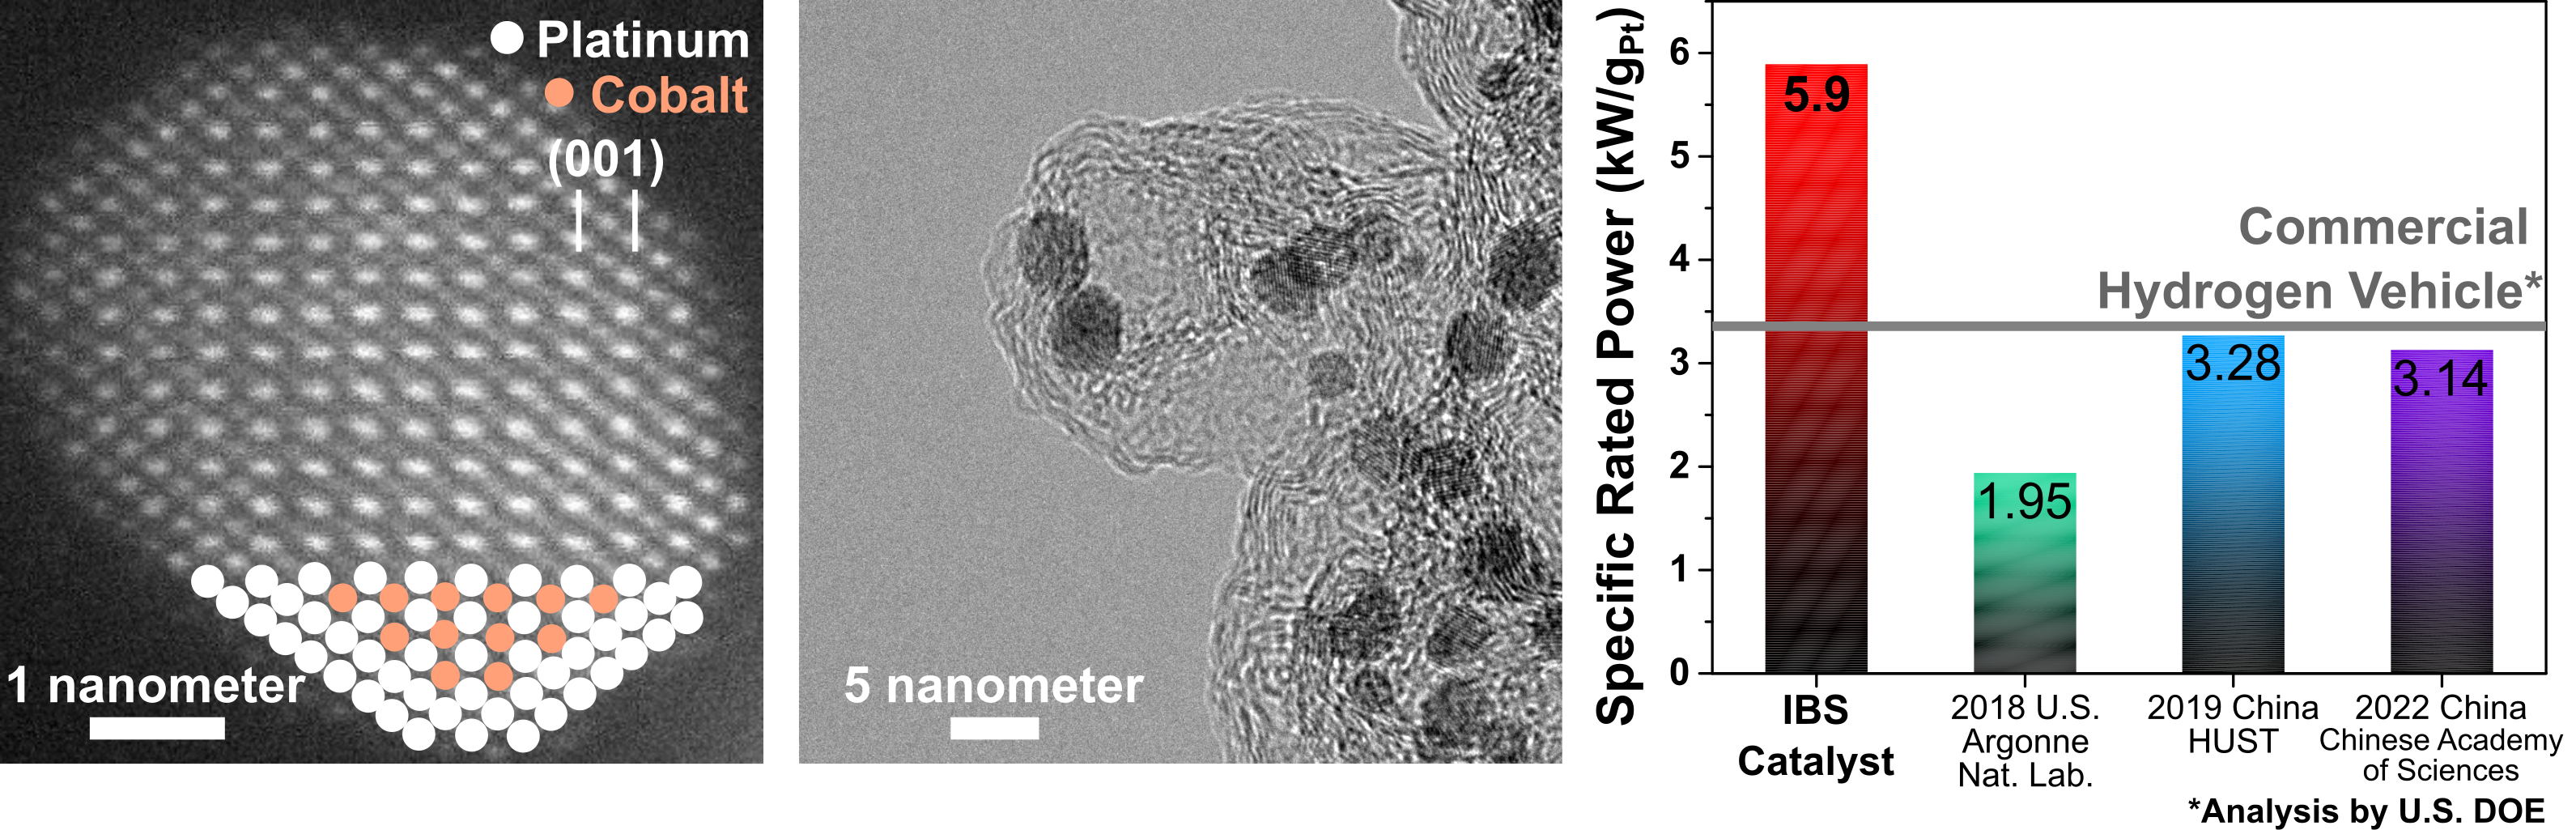 Figure 1. Microscopic (STEM and TEM) images of the developed catalyst and its PEMFC power performance. Compared to the state-of-the-art fuel cell catalysts, the catalyst developed by the CNR-IBS team showed almost twice the power performance per platinum use.